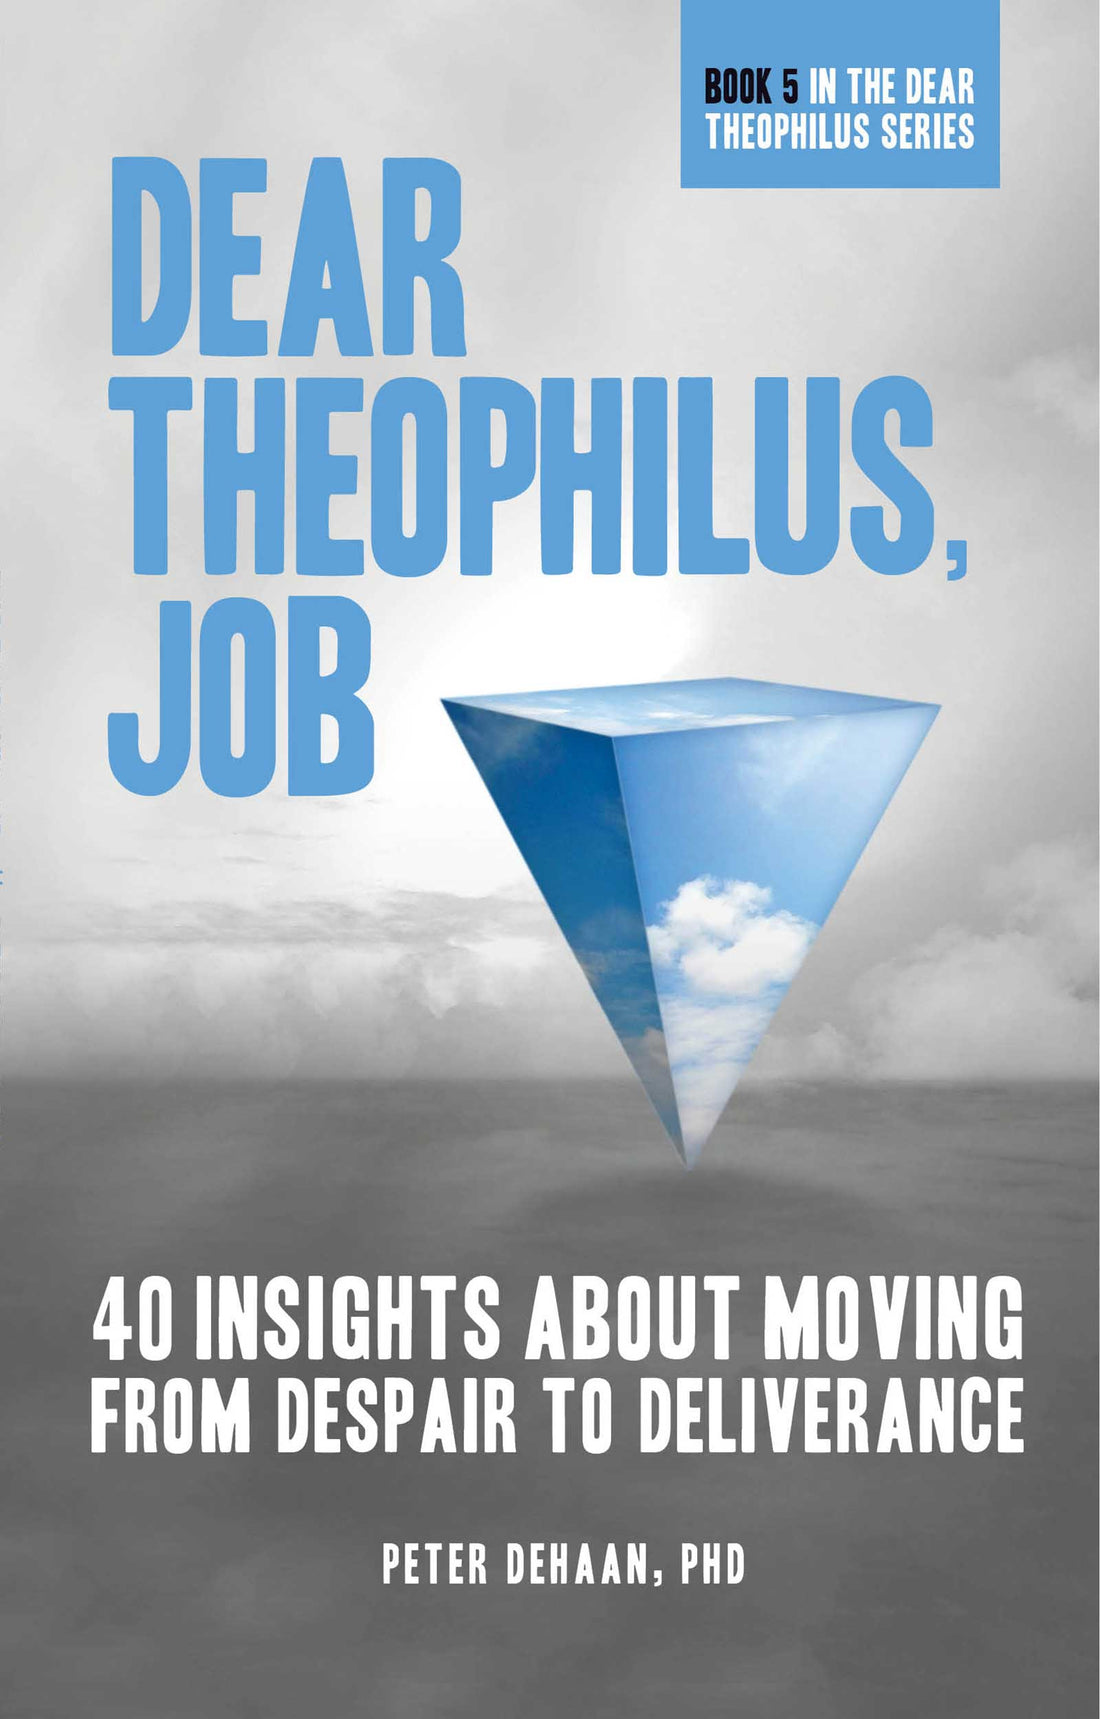 Dear Theophilus Job, by Peter DeHaan